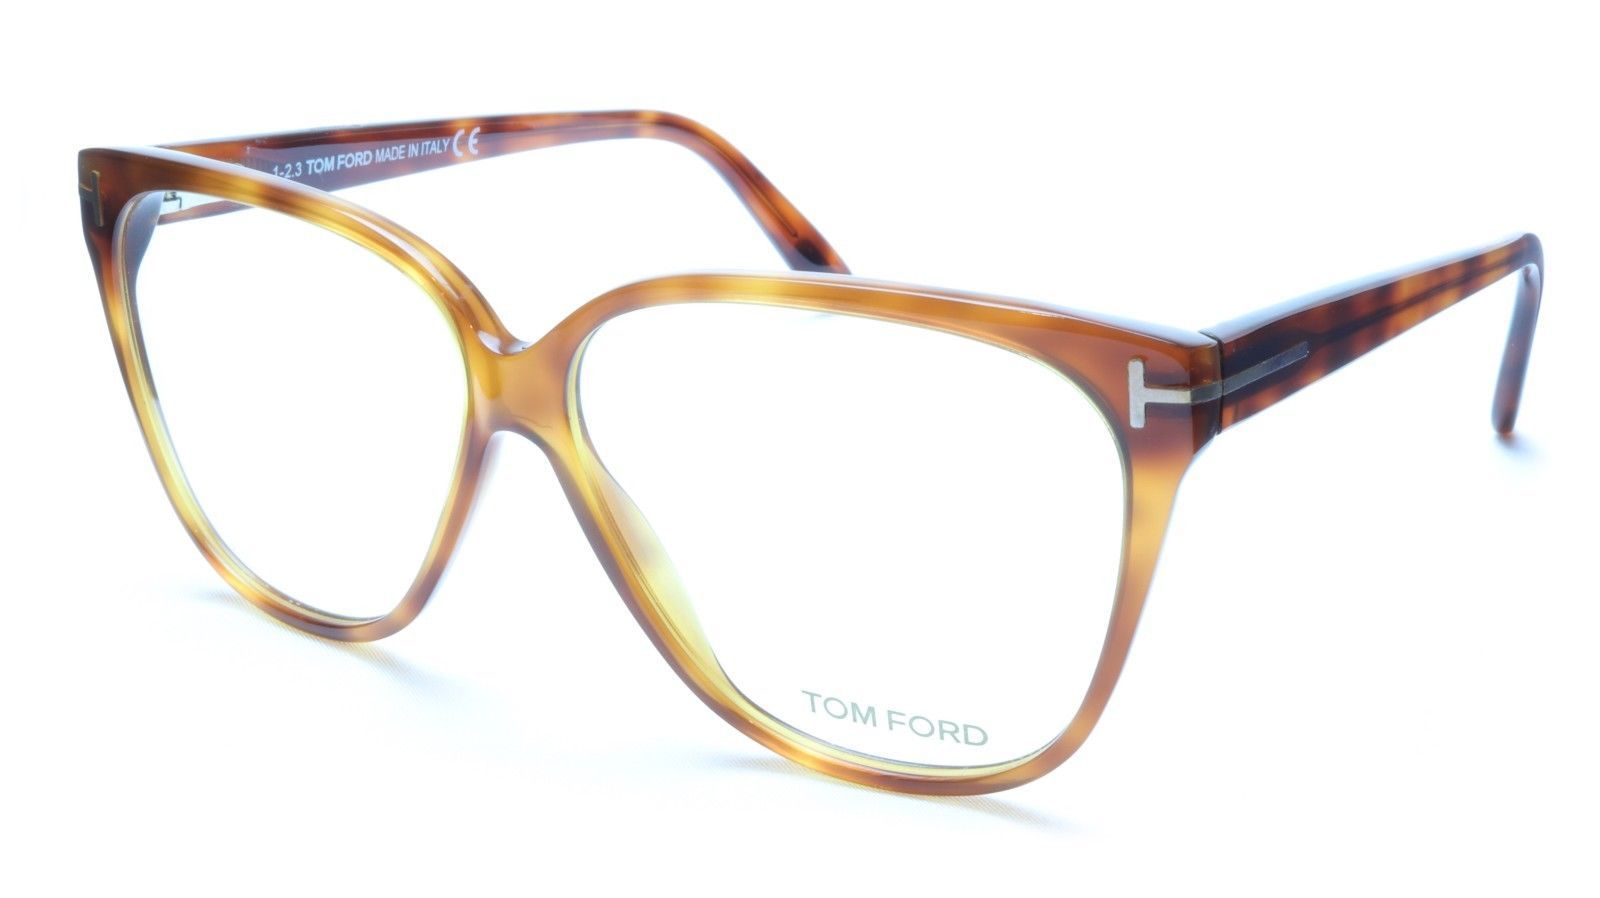 Primary image for Tom Ford TF5302 053 Eyeglasses Frame Brown Tortoise Acetate Italy Made 57-11-140